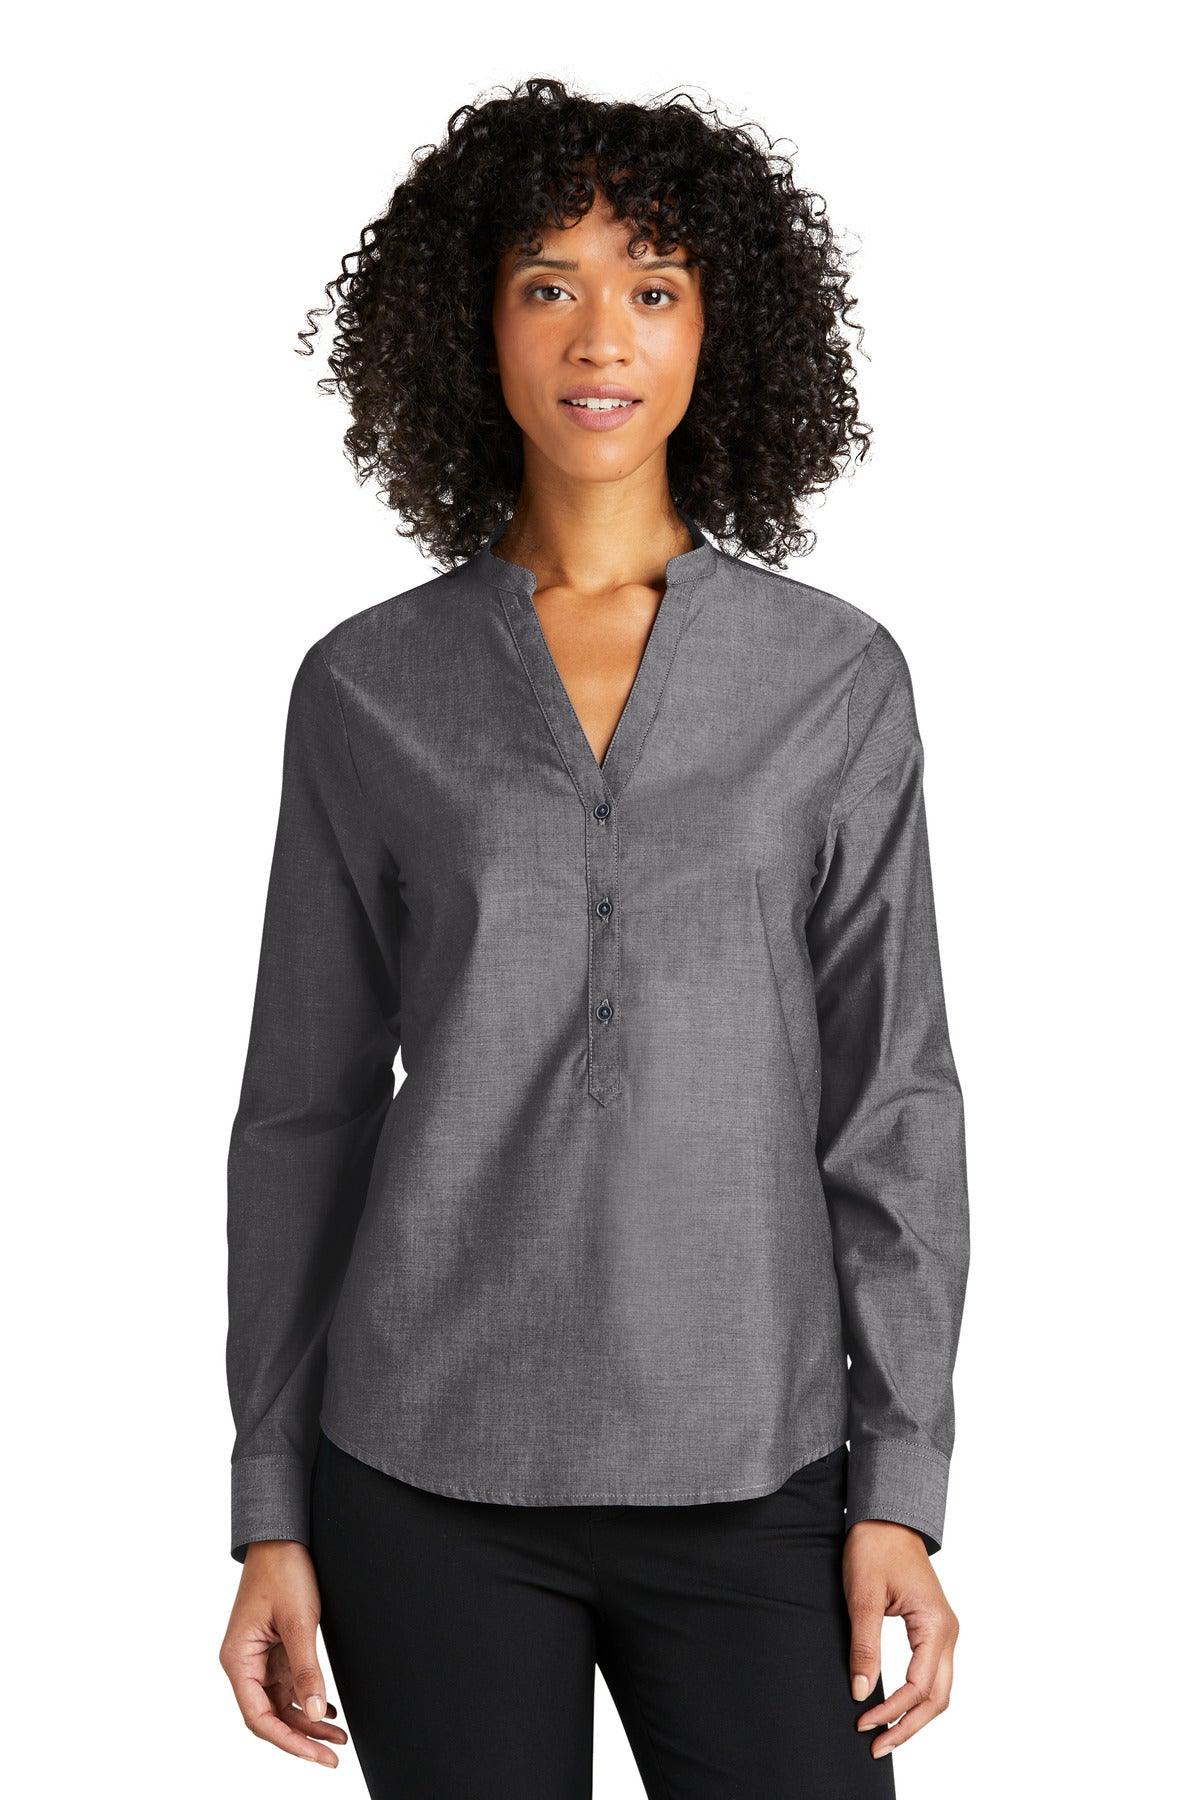 Port Authority Ladies Long Sleeve Chambray Easy Care Shirt LW382 - Dresses Max